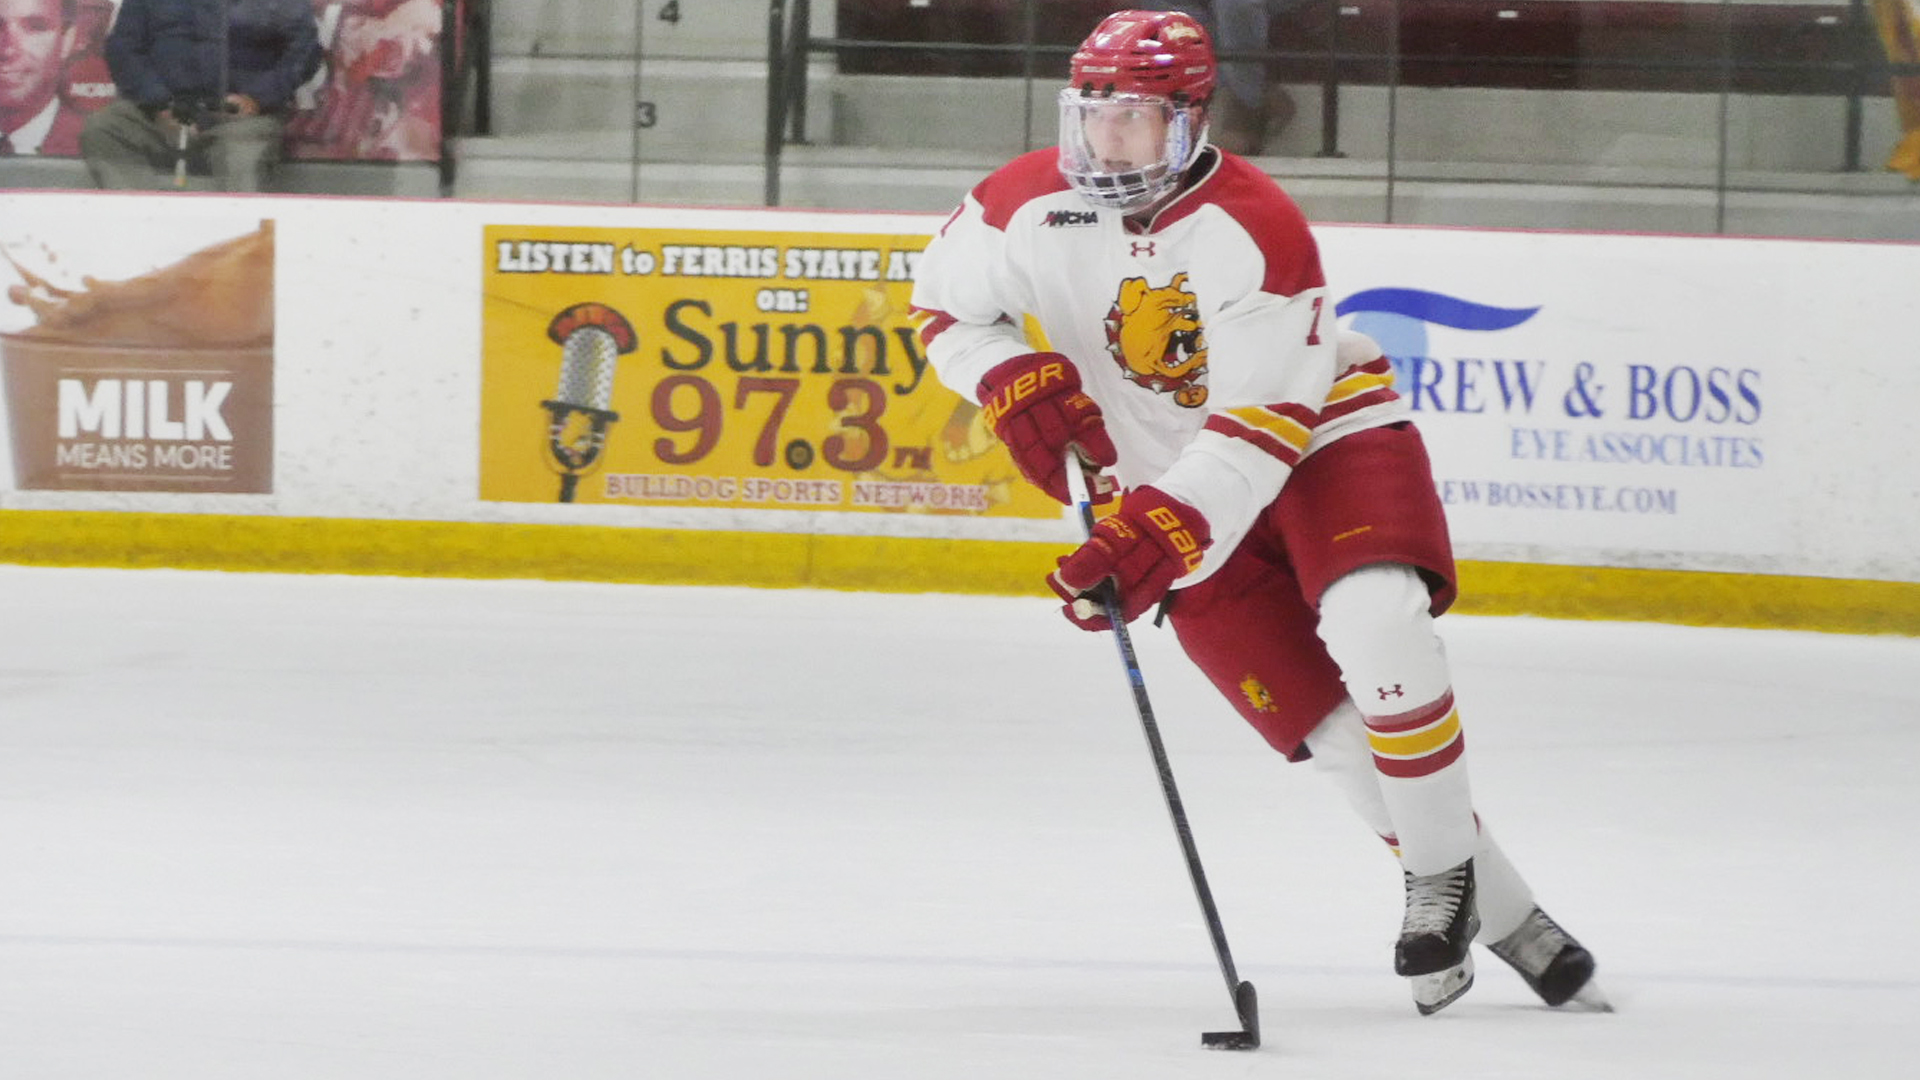 Ferris State Skates To Tie In Exhibition Play Against Waterloo